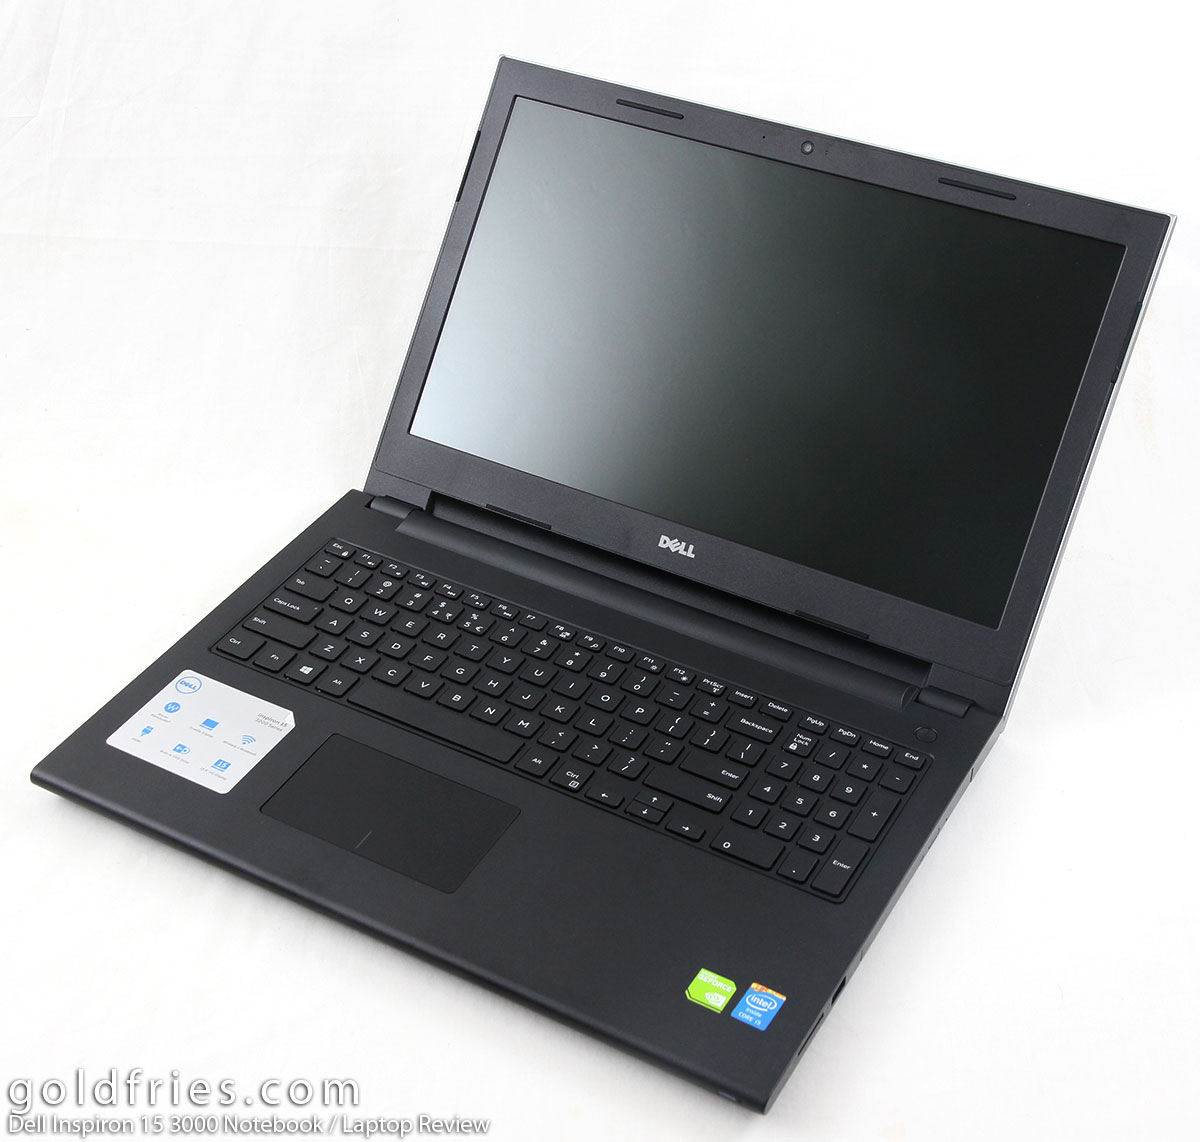 Dell Inspiron 15 3000 Notebook / Laptop Review goldfries